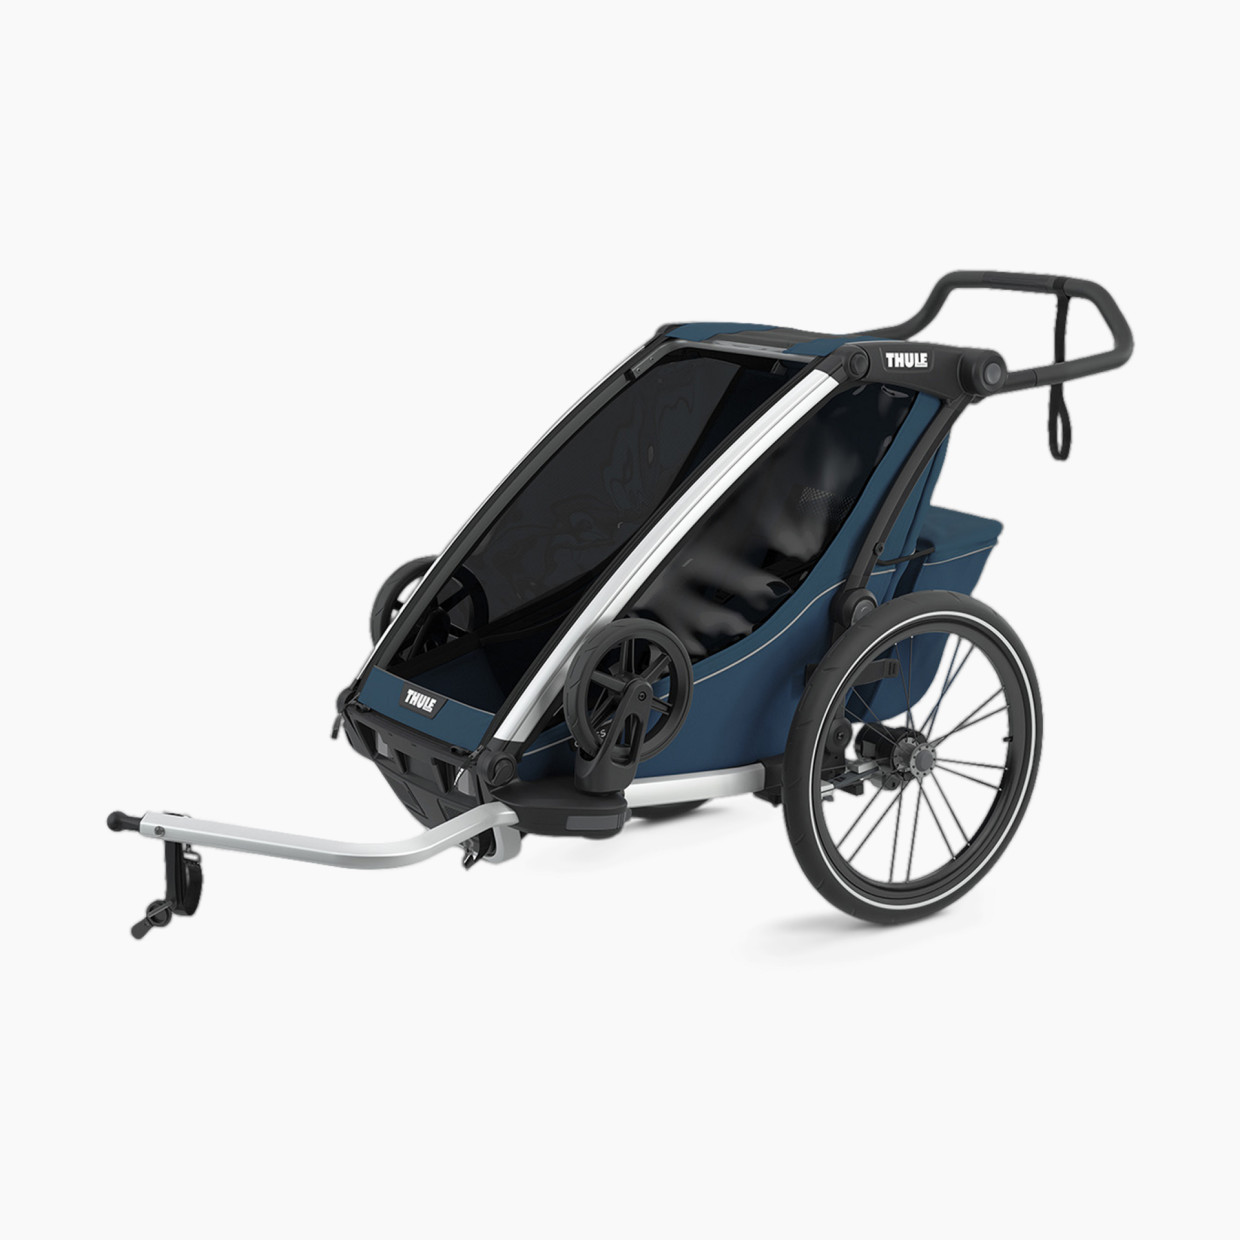 Thule Chariot Cross 2 + Cycle/Stroll Jogging Stroller - Majolica Blue.